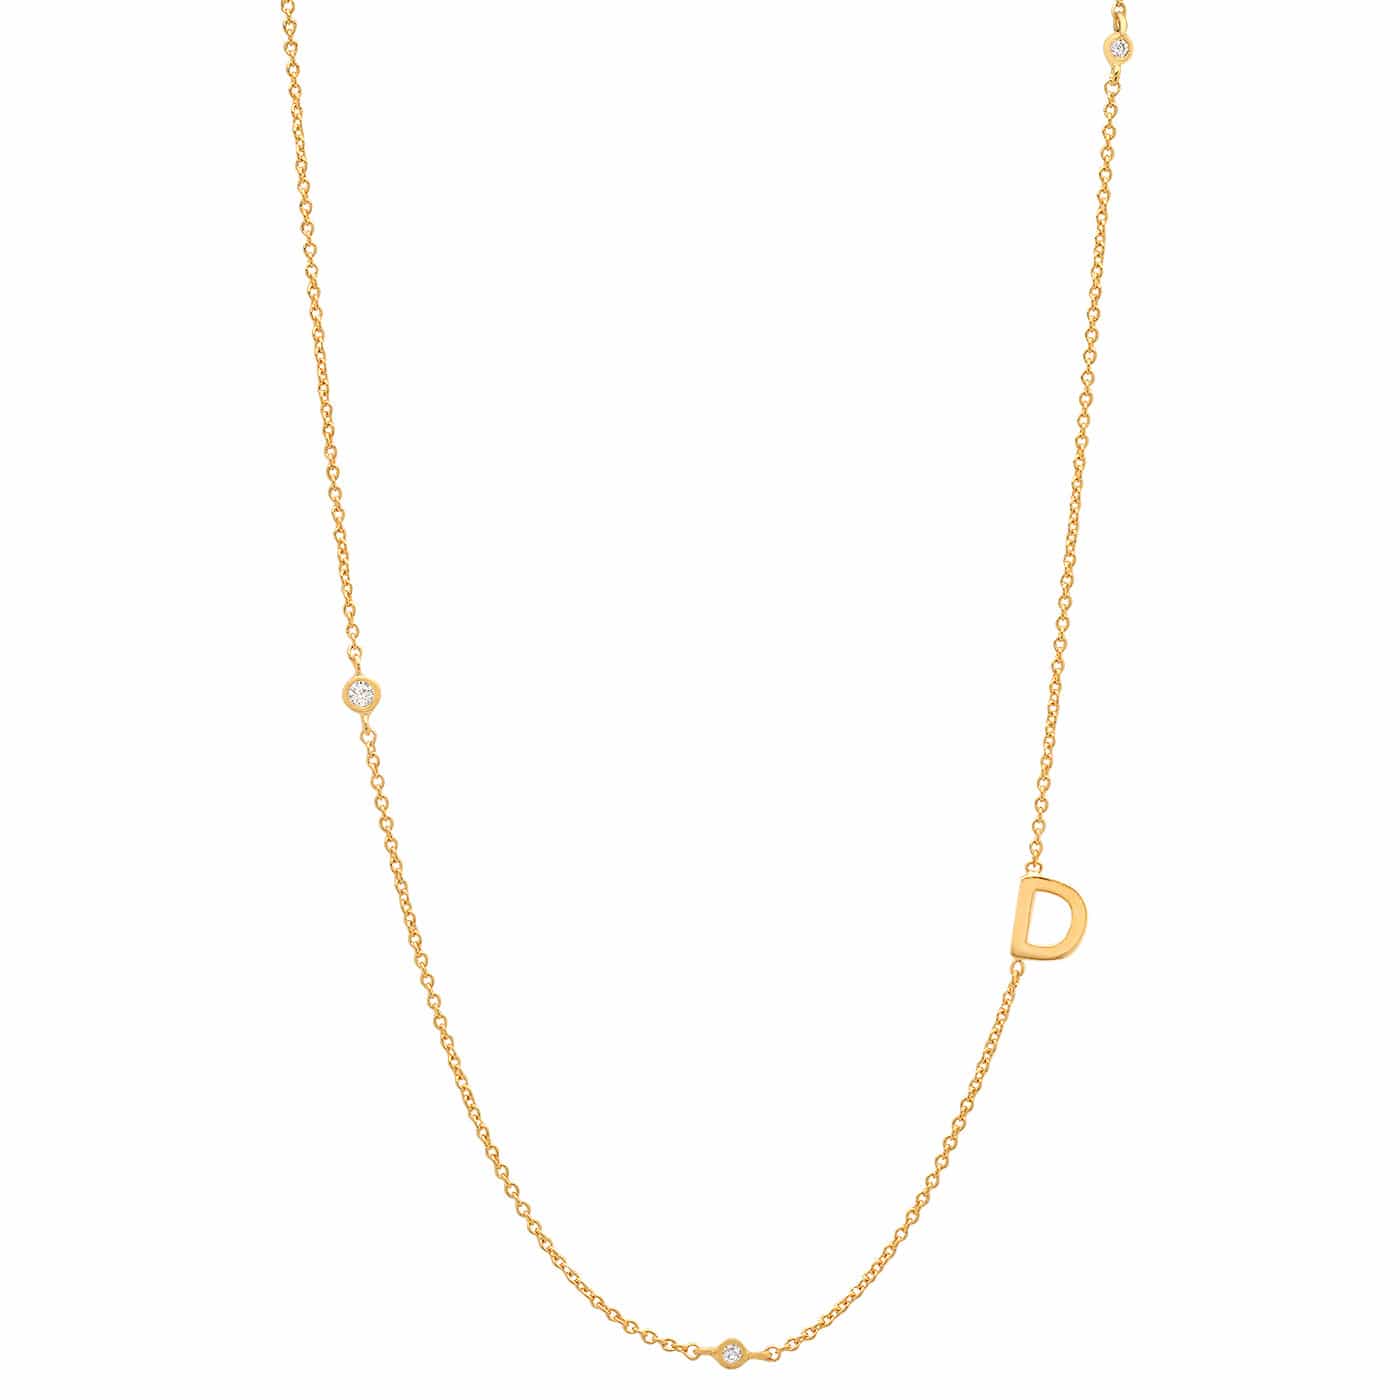 TAI JEWELRY Necklace D Sideways Initial Gold Necklace With CZ Accents